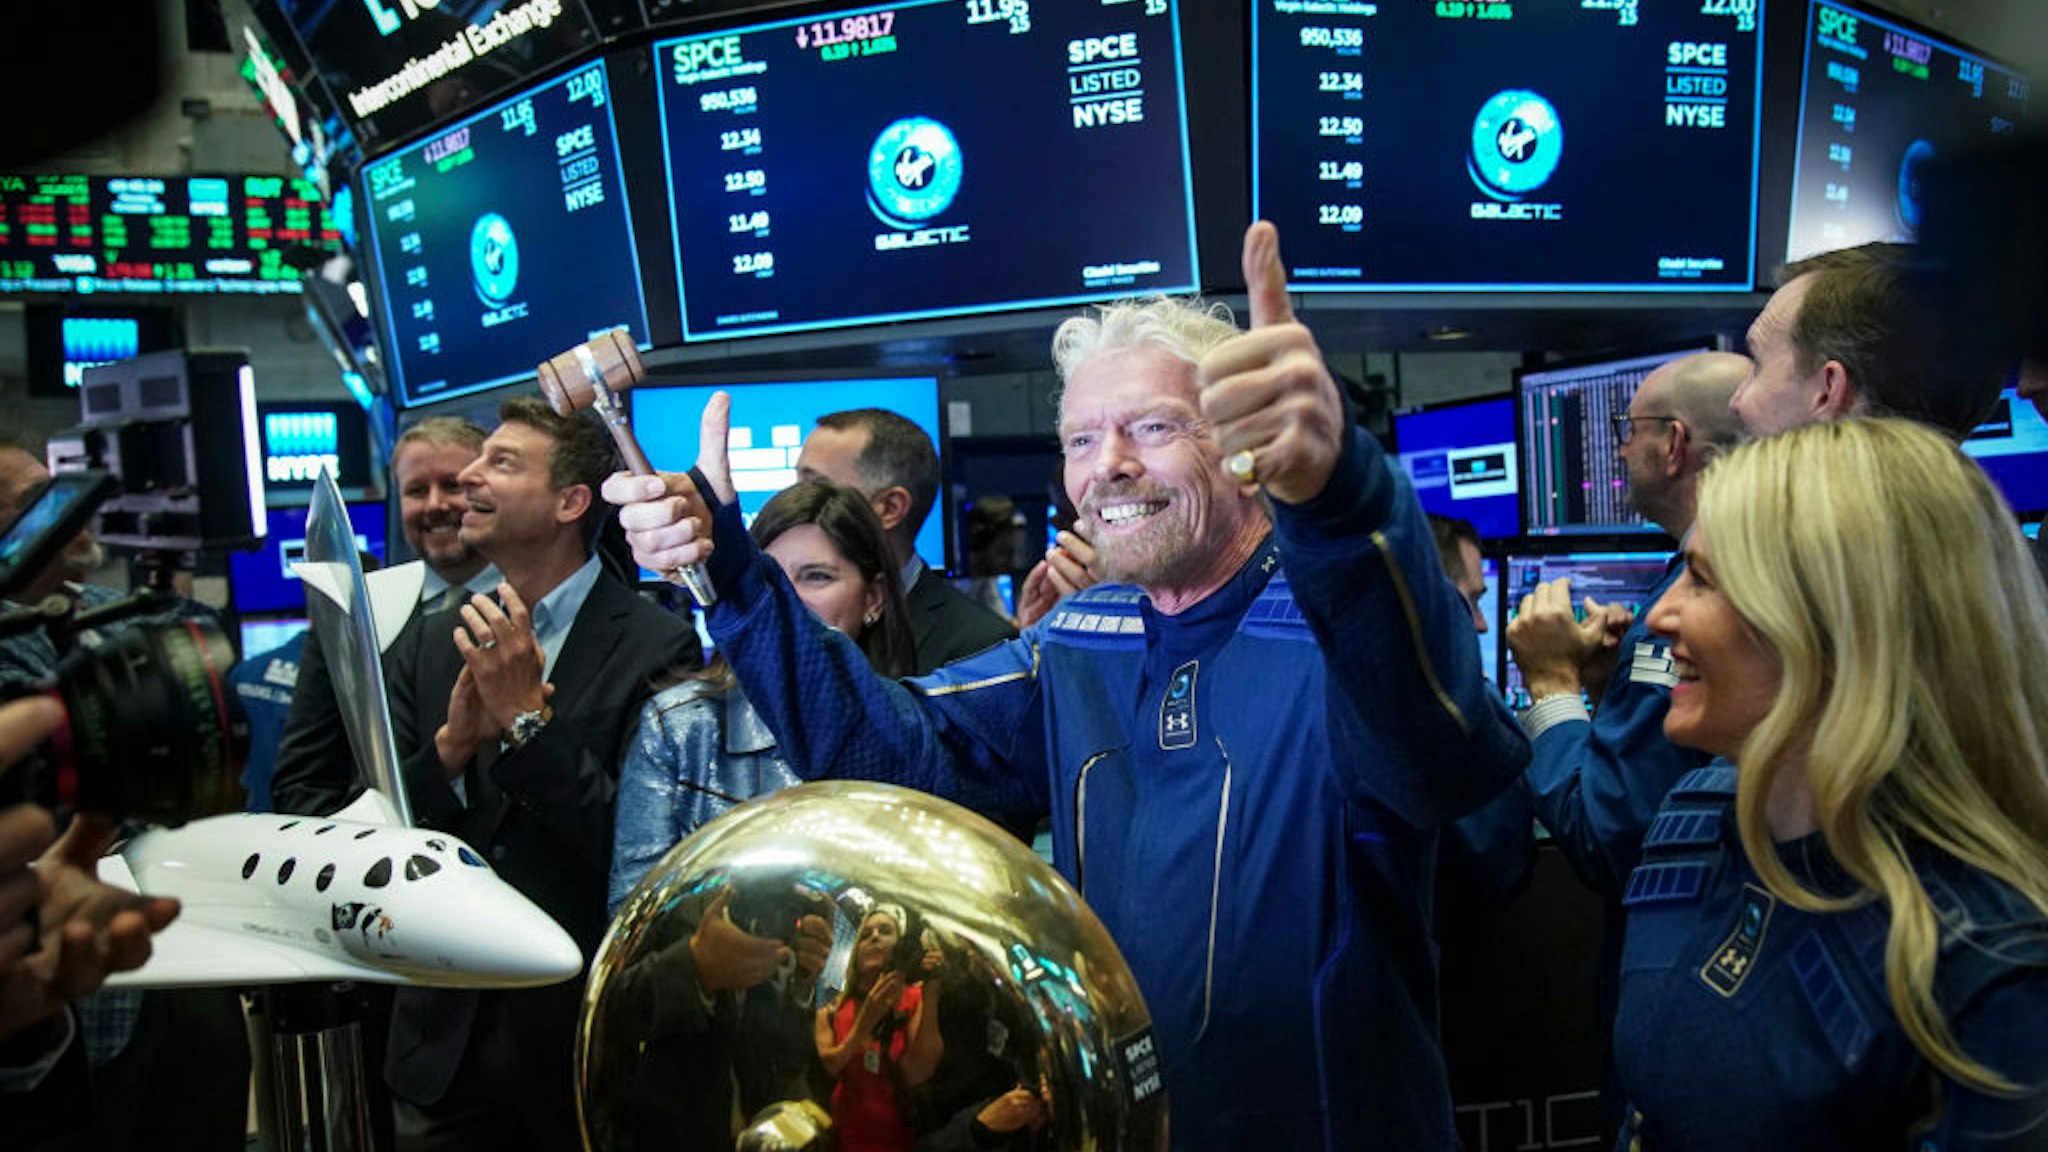 NEW YORK, NY - OCTOBER 28:  Sir Richard Branson, Founder of Virgin Galactic, gives the thumbs up after ringing a ceremonial bell on the floor of the New York Stock Exchange (NYSE) to promote the first day of trading of Virgin Galactic Holdings shares on October 28, 2019 in New York City. Virgin Galactic Holdings became the first space-tourism company to go public as it began trading on Monday with a market value of about $1 billion. (Photo by Drew Angerer/Getty Images)